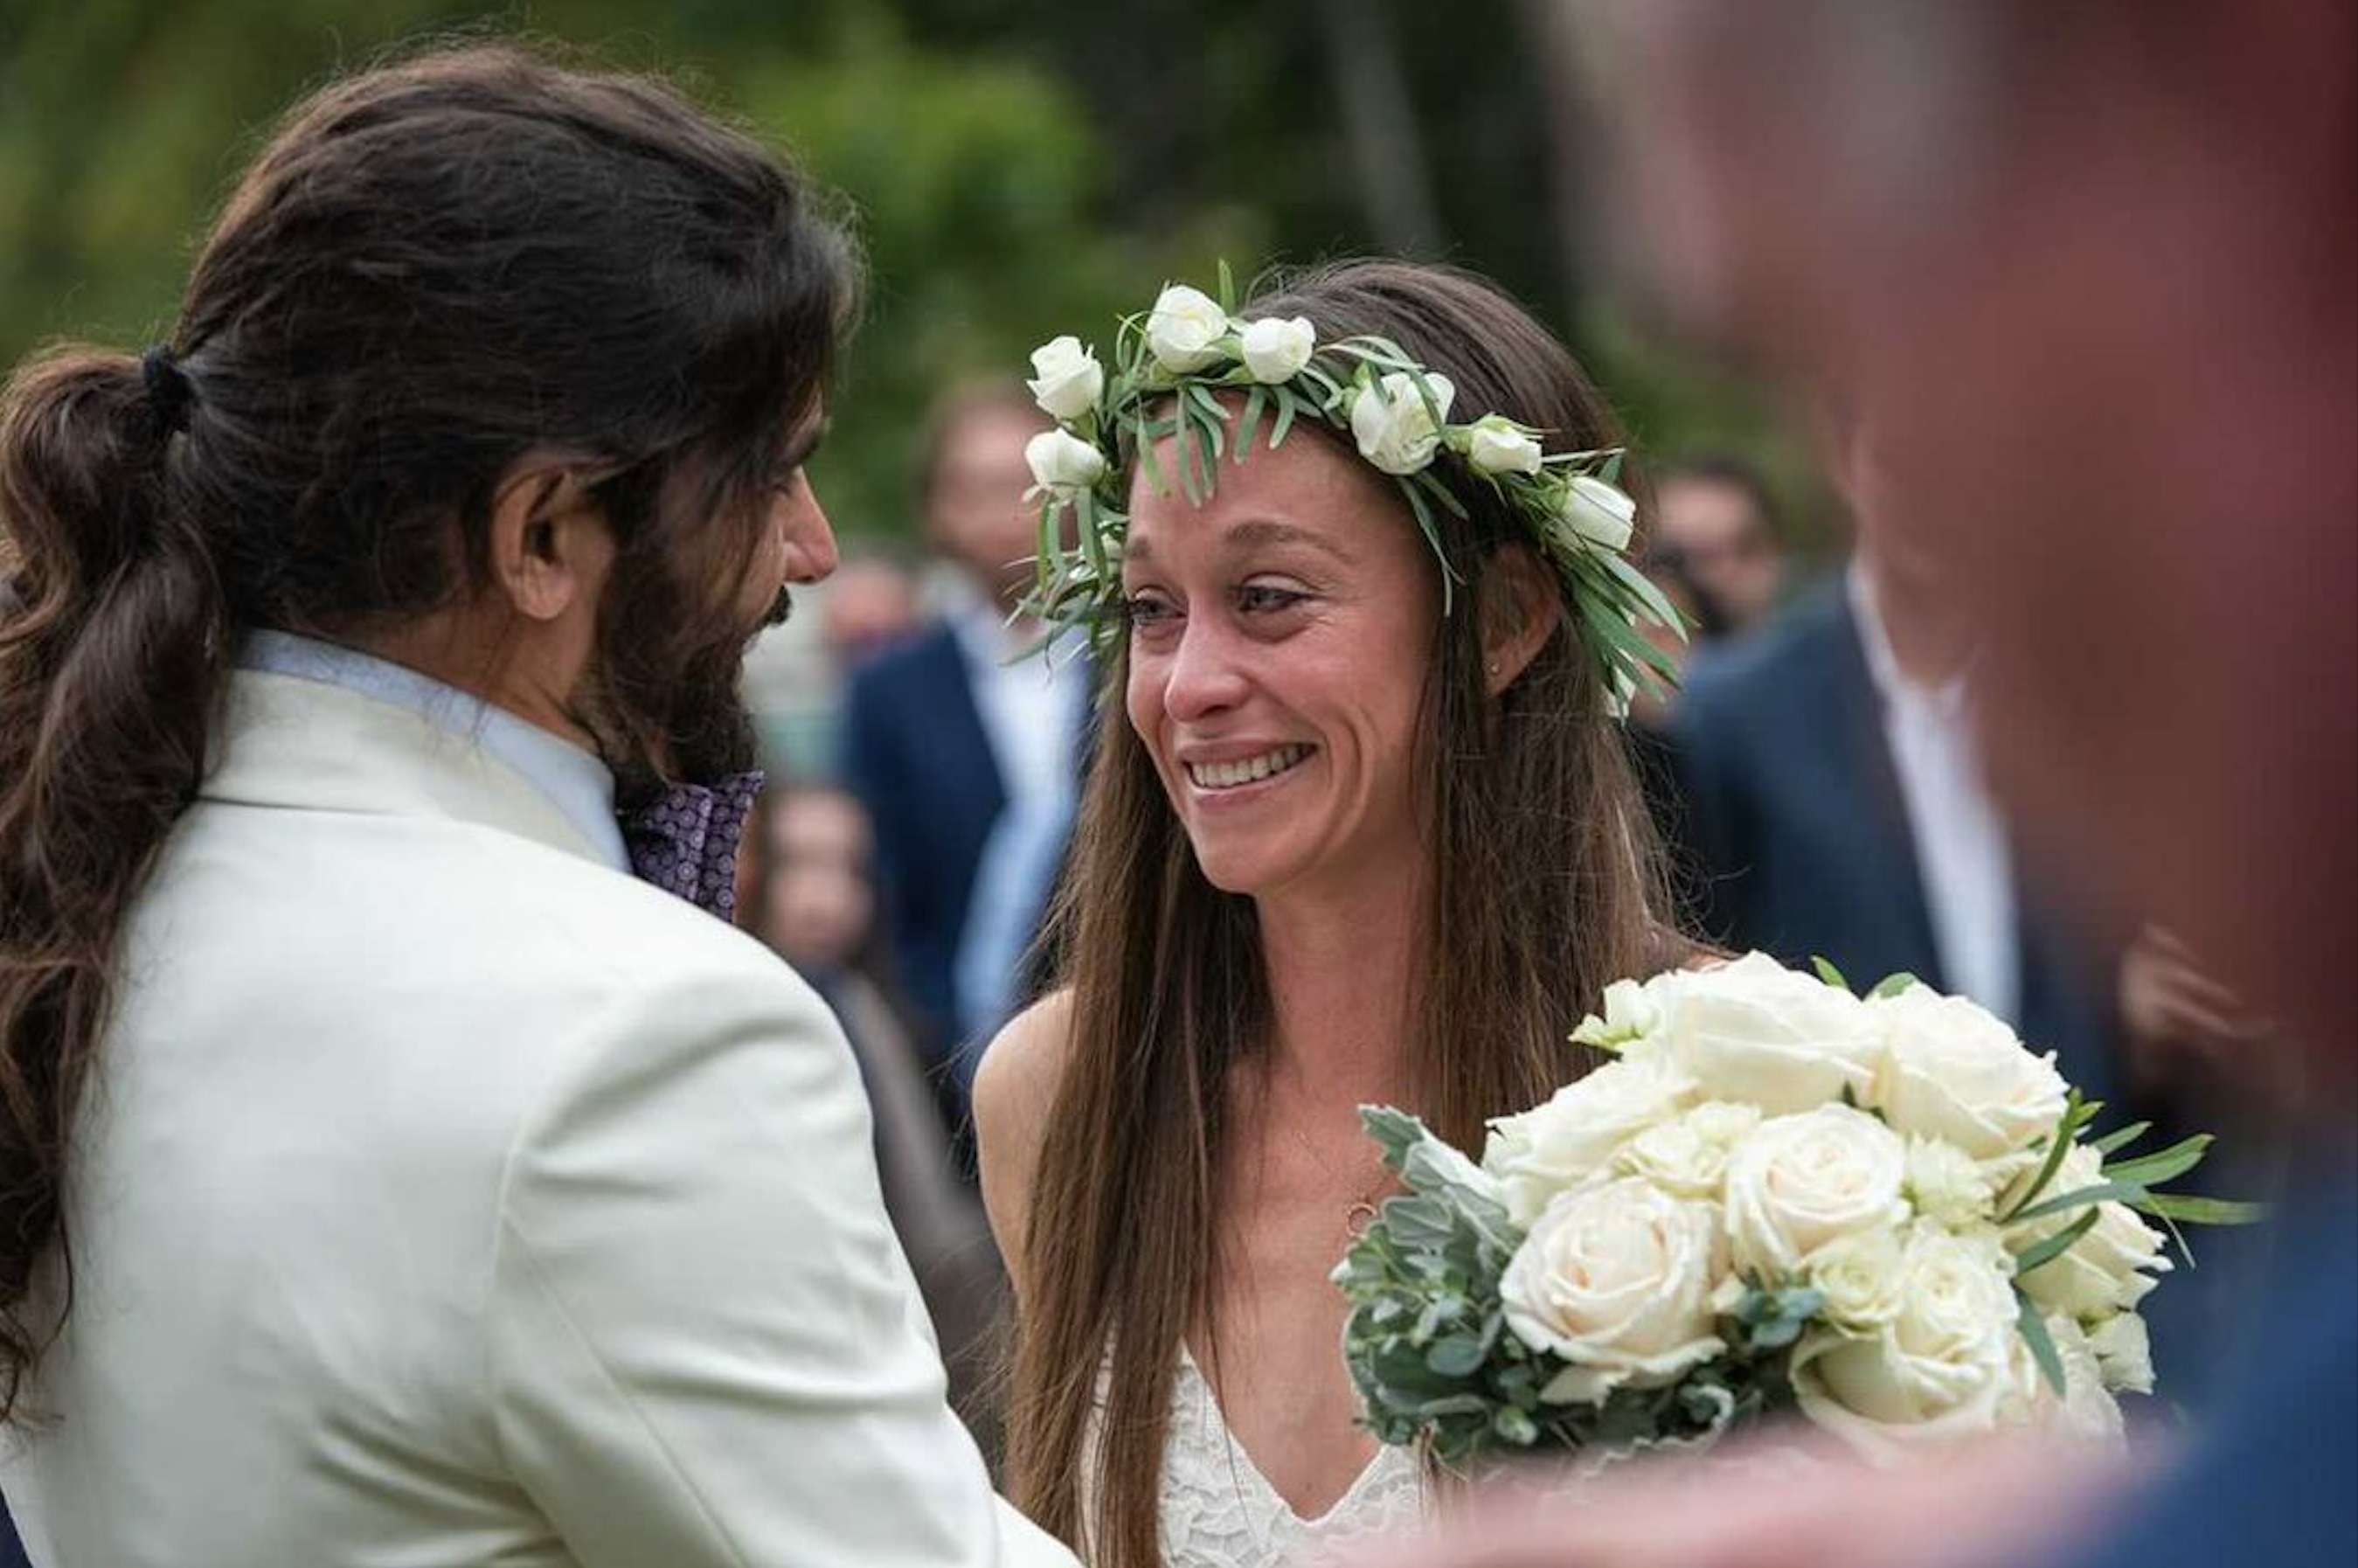 Video of Blind Man Marrying Woman in Tactile Dress So He Could Feel Her Beauty Goes Viral